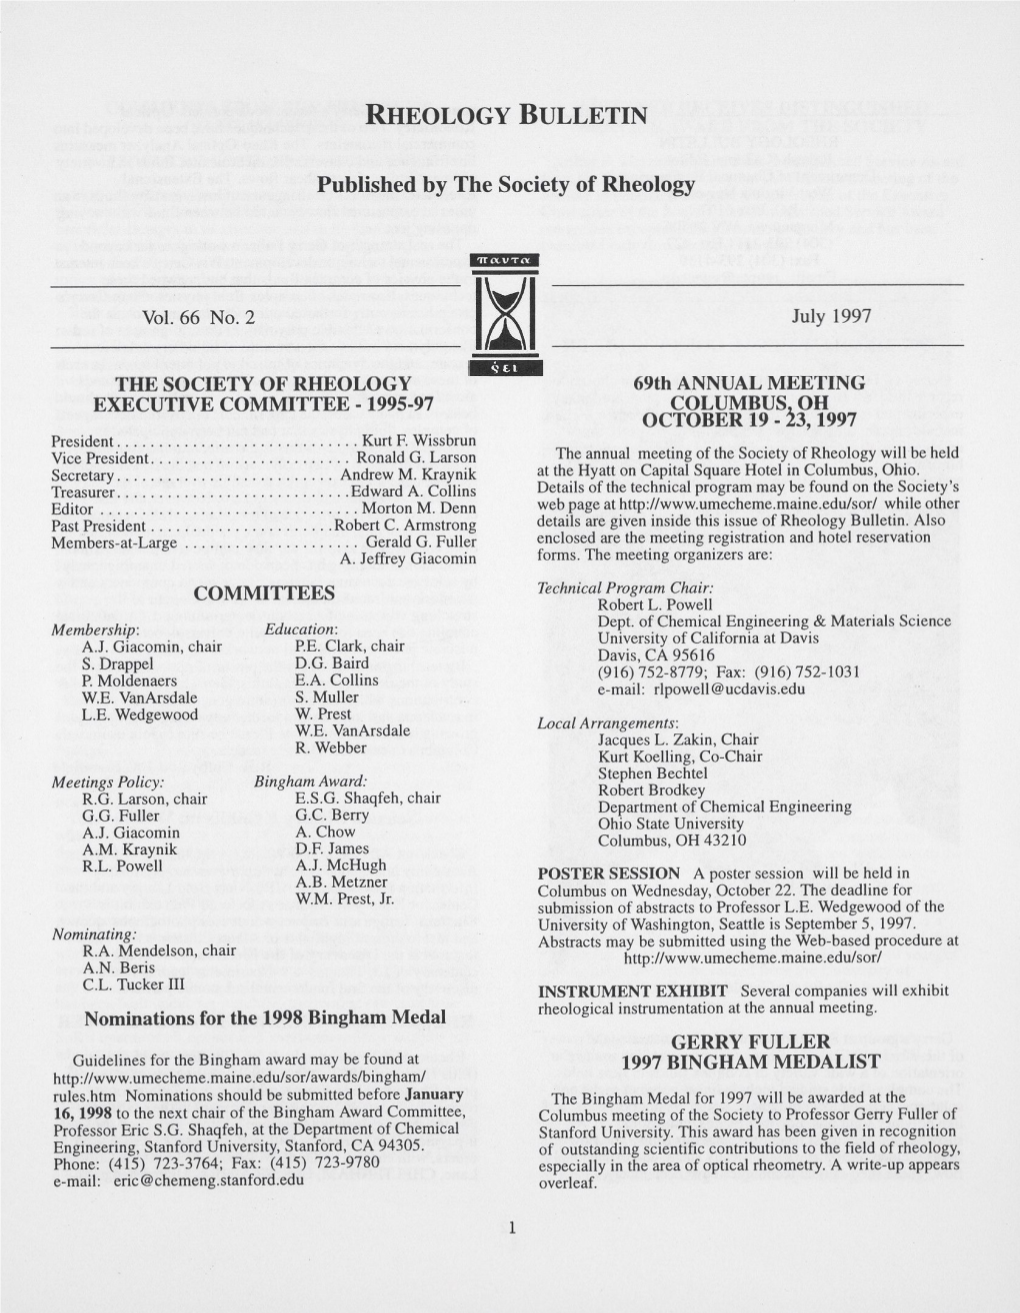 RHEOLOGY BULLETIN Published by the Society of Rheology